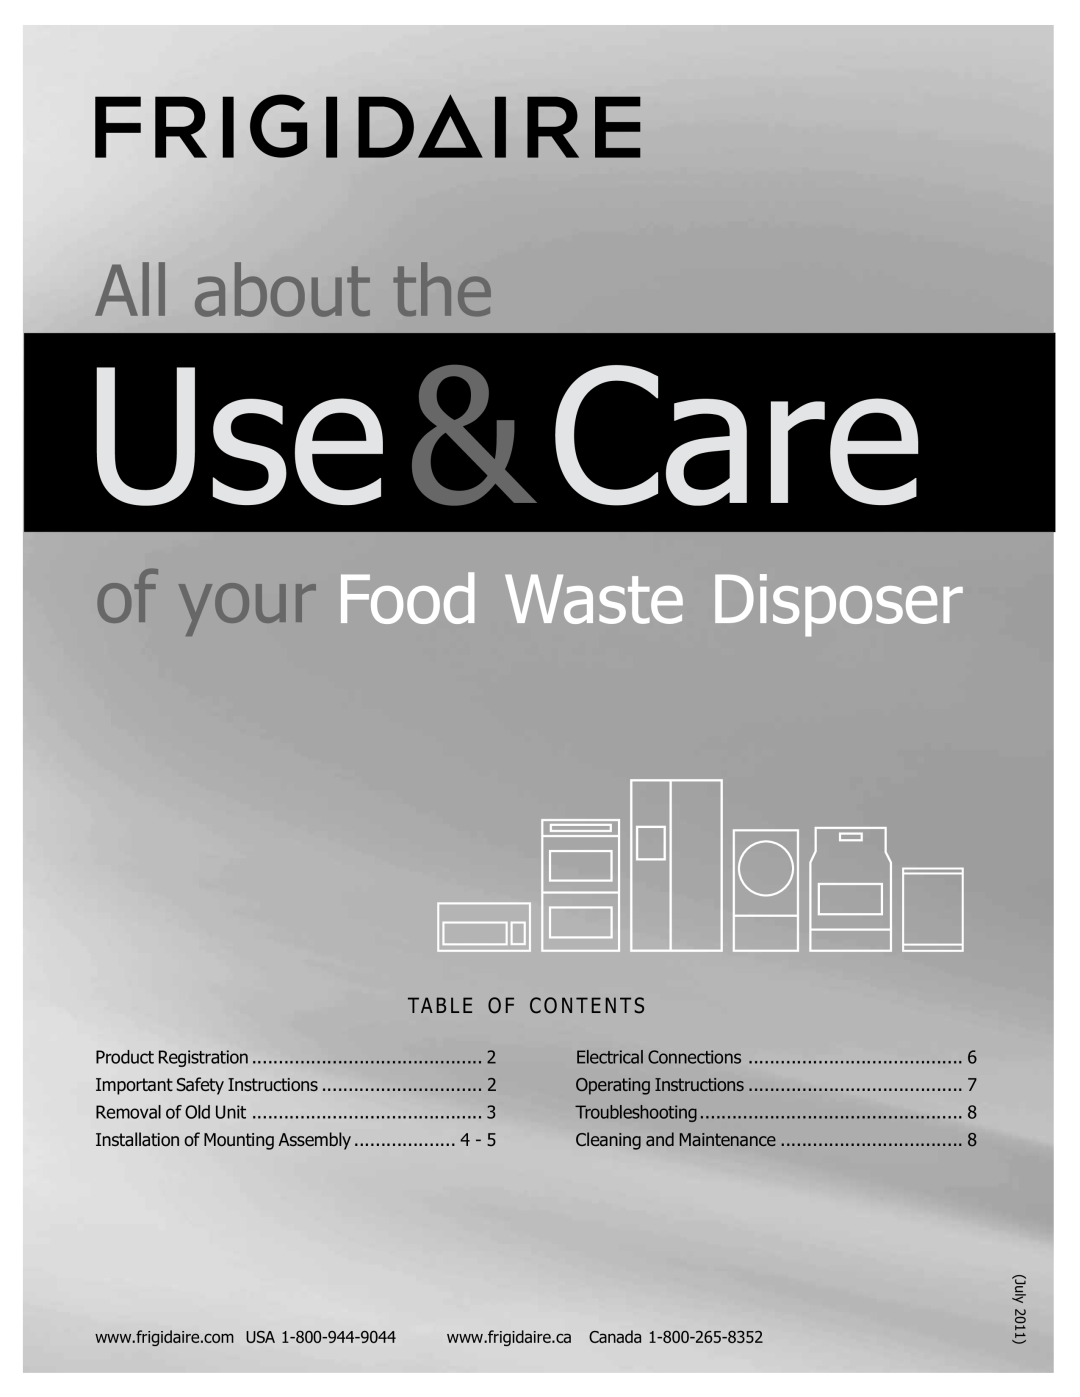 Frigidaire 560C525P02 manual Use&Care, All about the, of your Food Waste Disposer, Ta B L E O F C O N T E N T S, July 